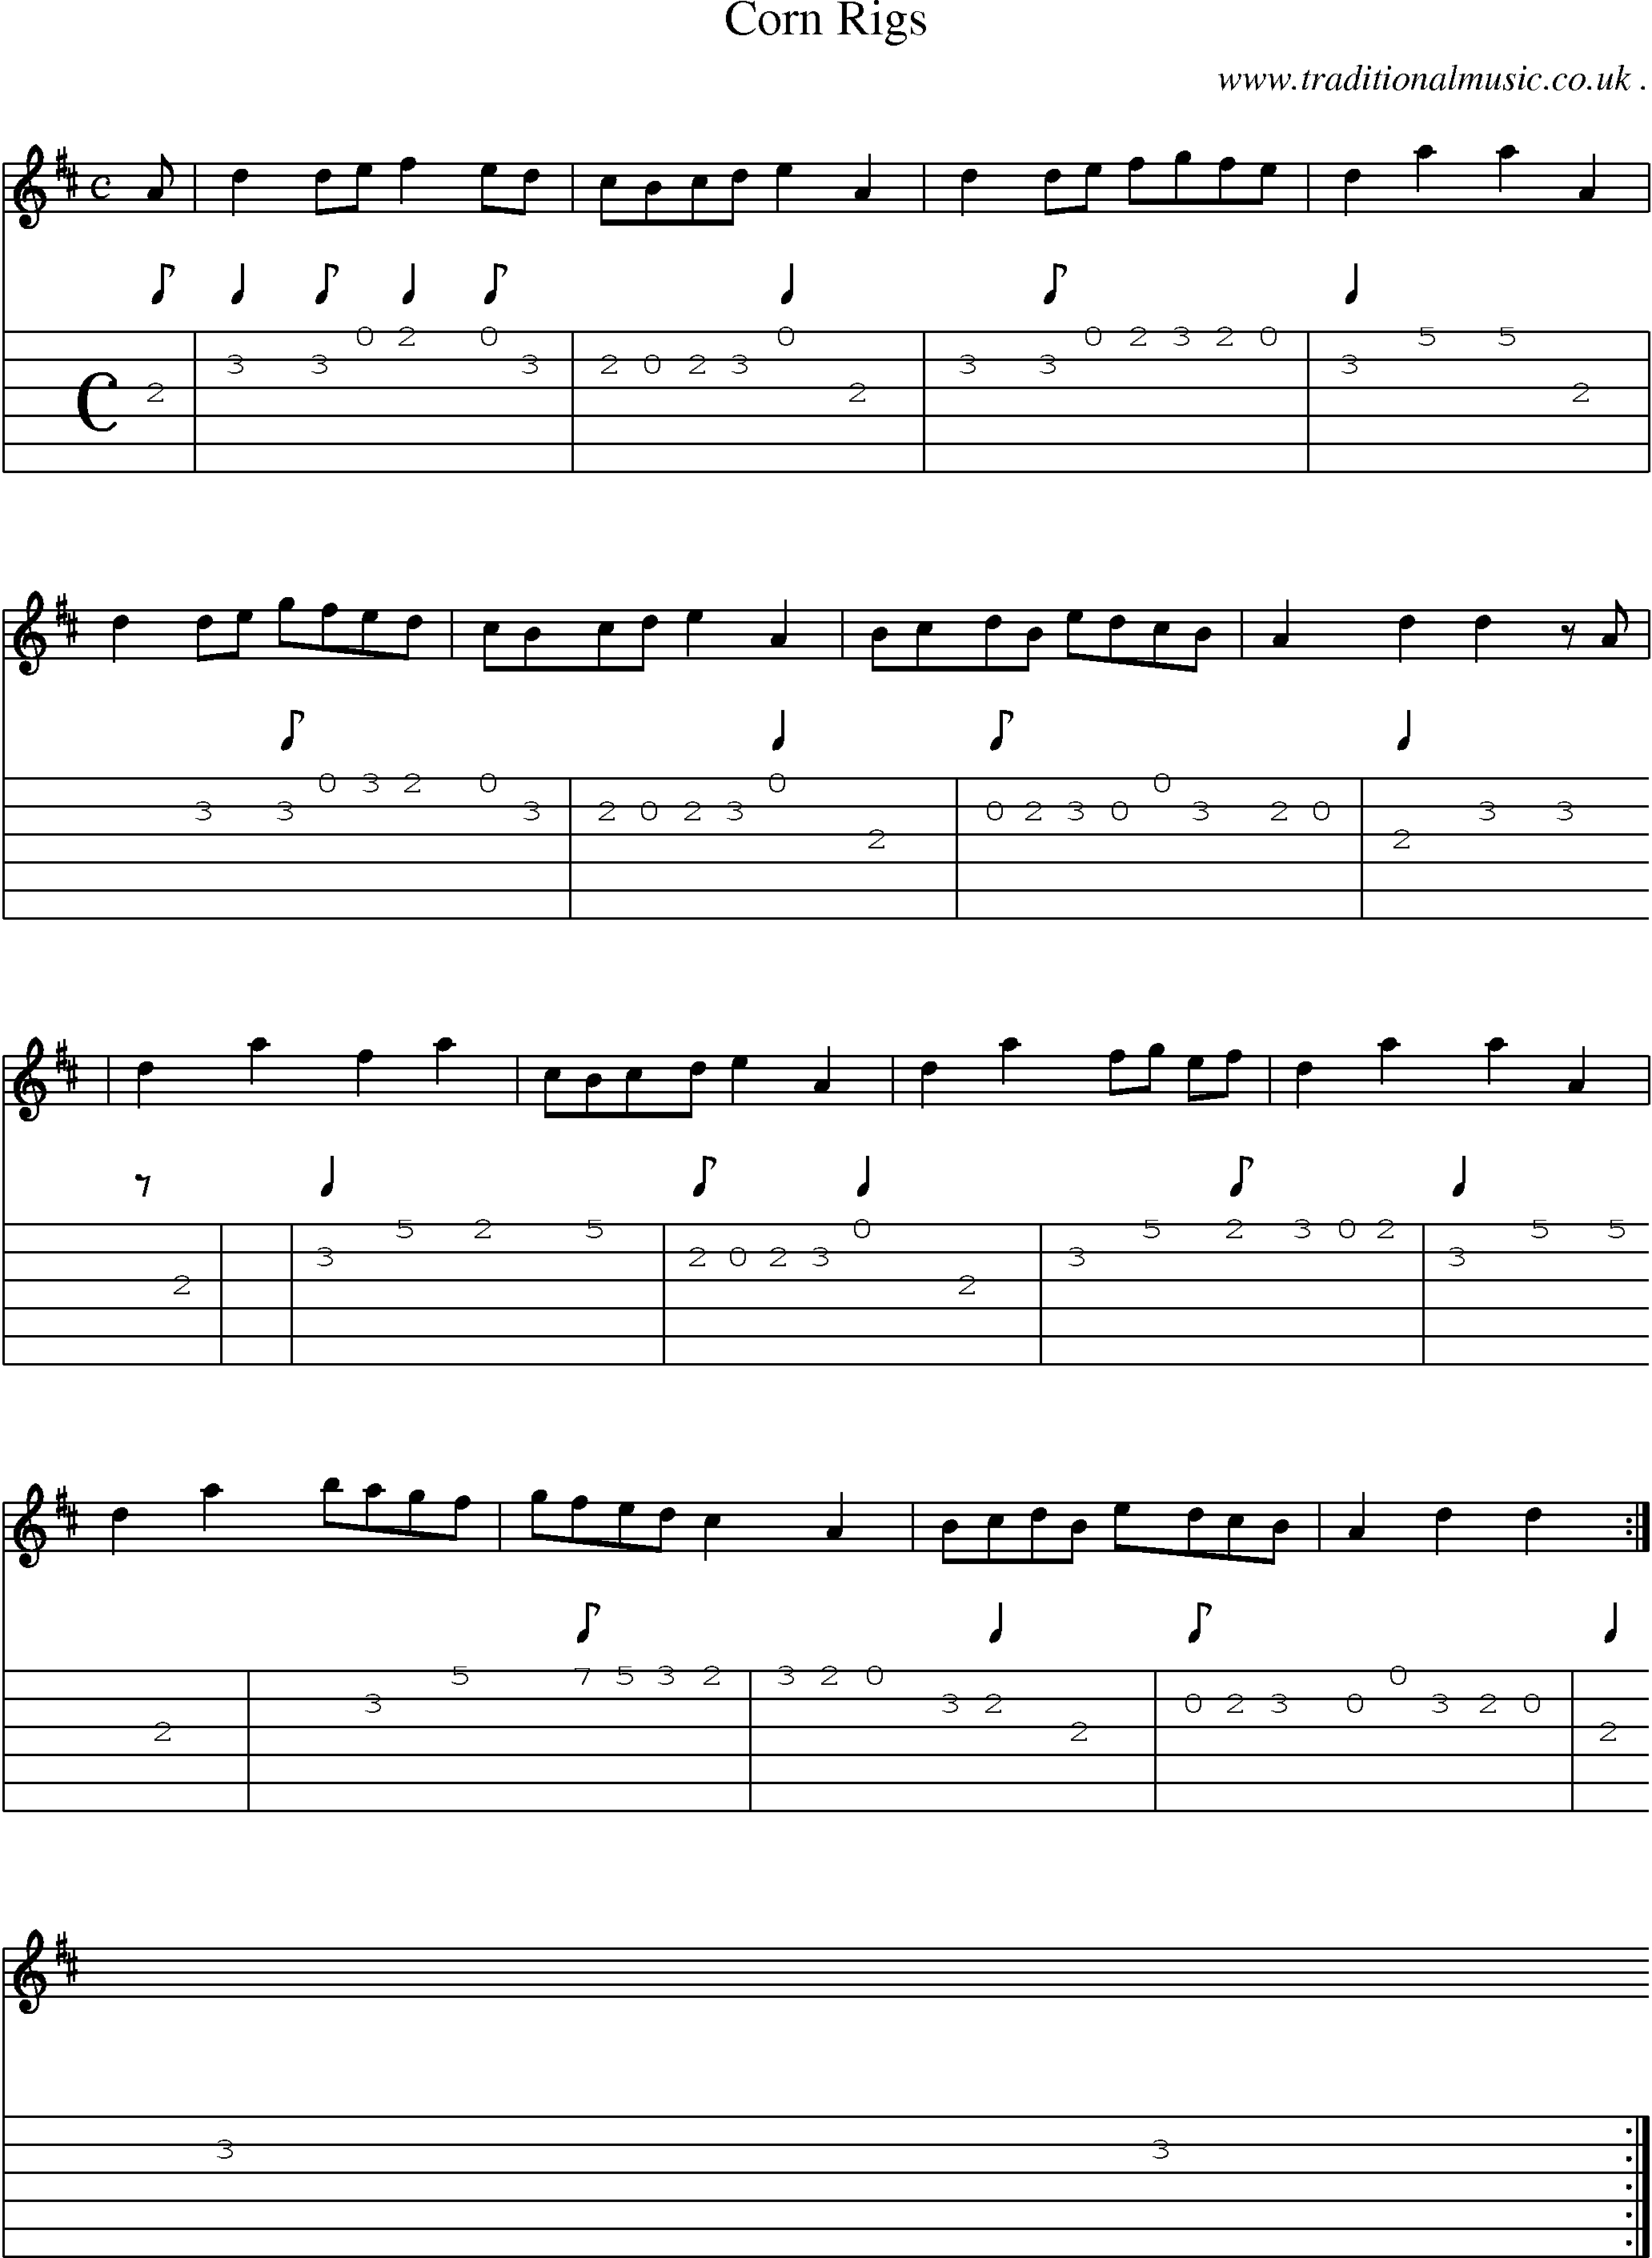 Sheet-music  score, Chords and Guitar Tabs for Corn Rigs